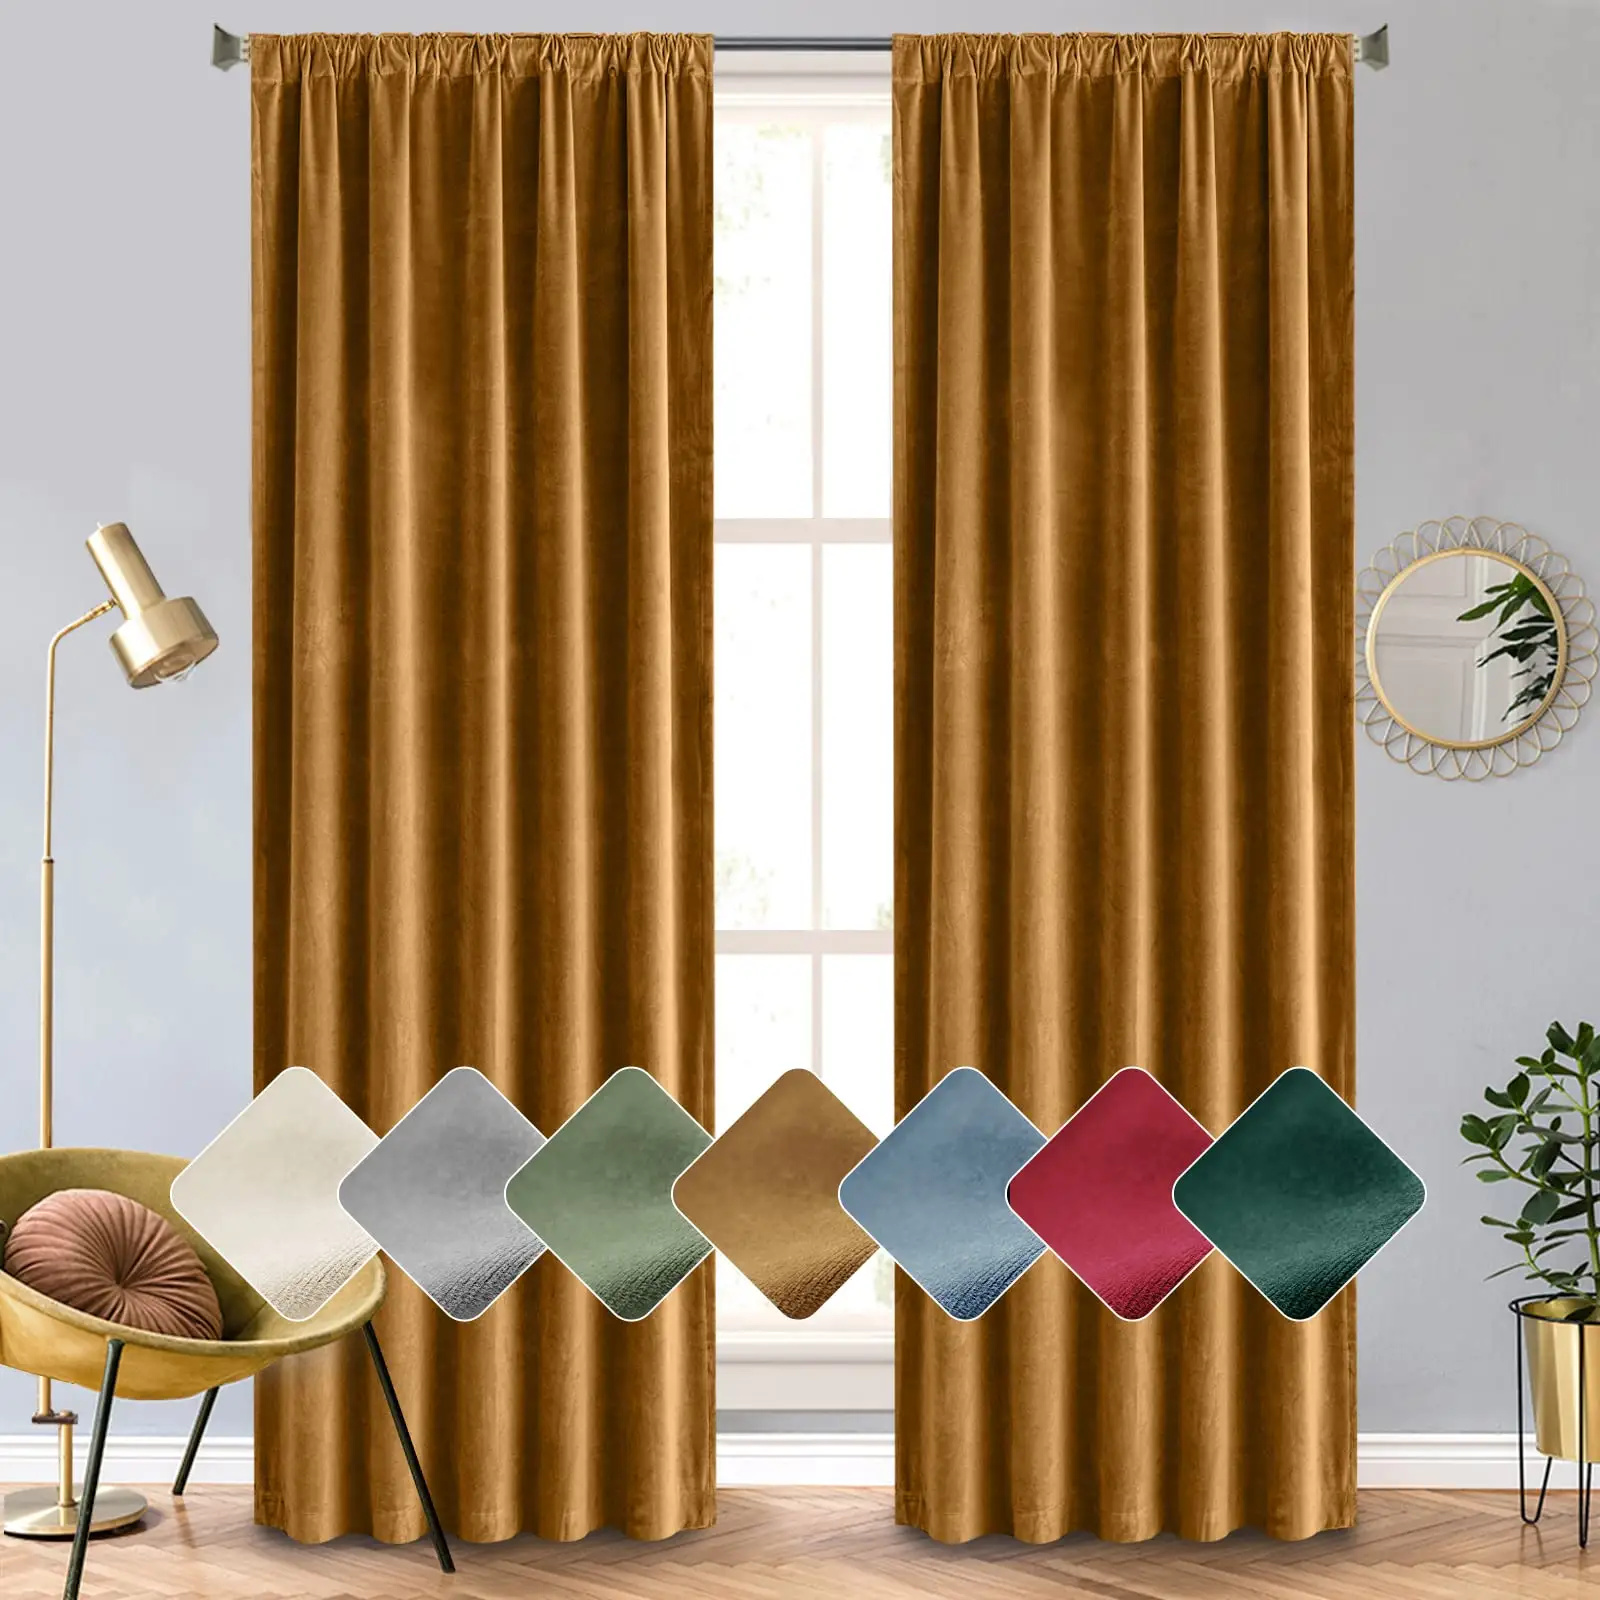 Door Window Curtains Premium Soft Fabric Gold Brown Thermal Insulated Blackout Velvet Curtain For Living Room